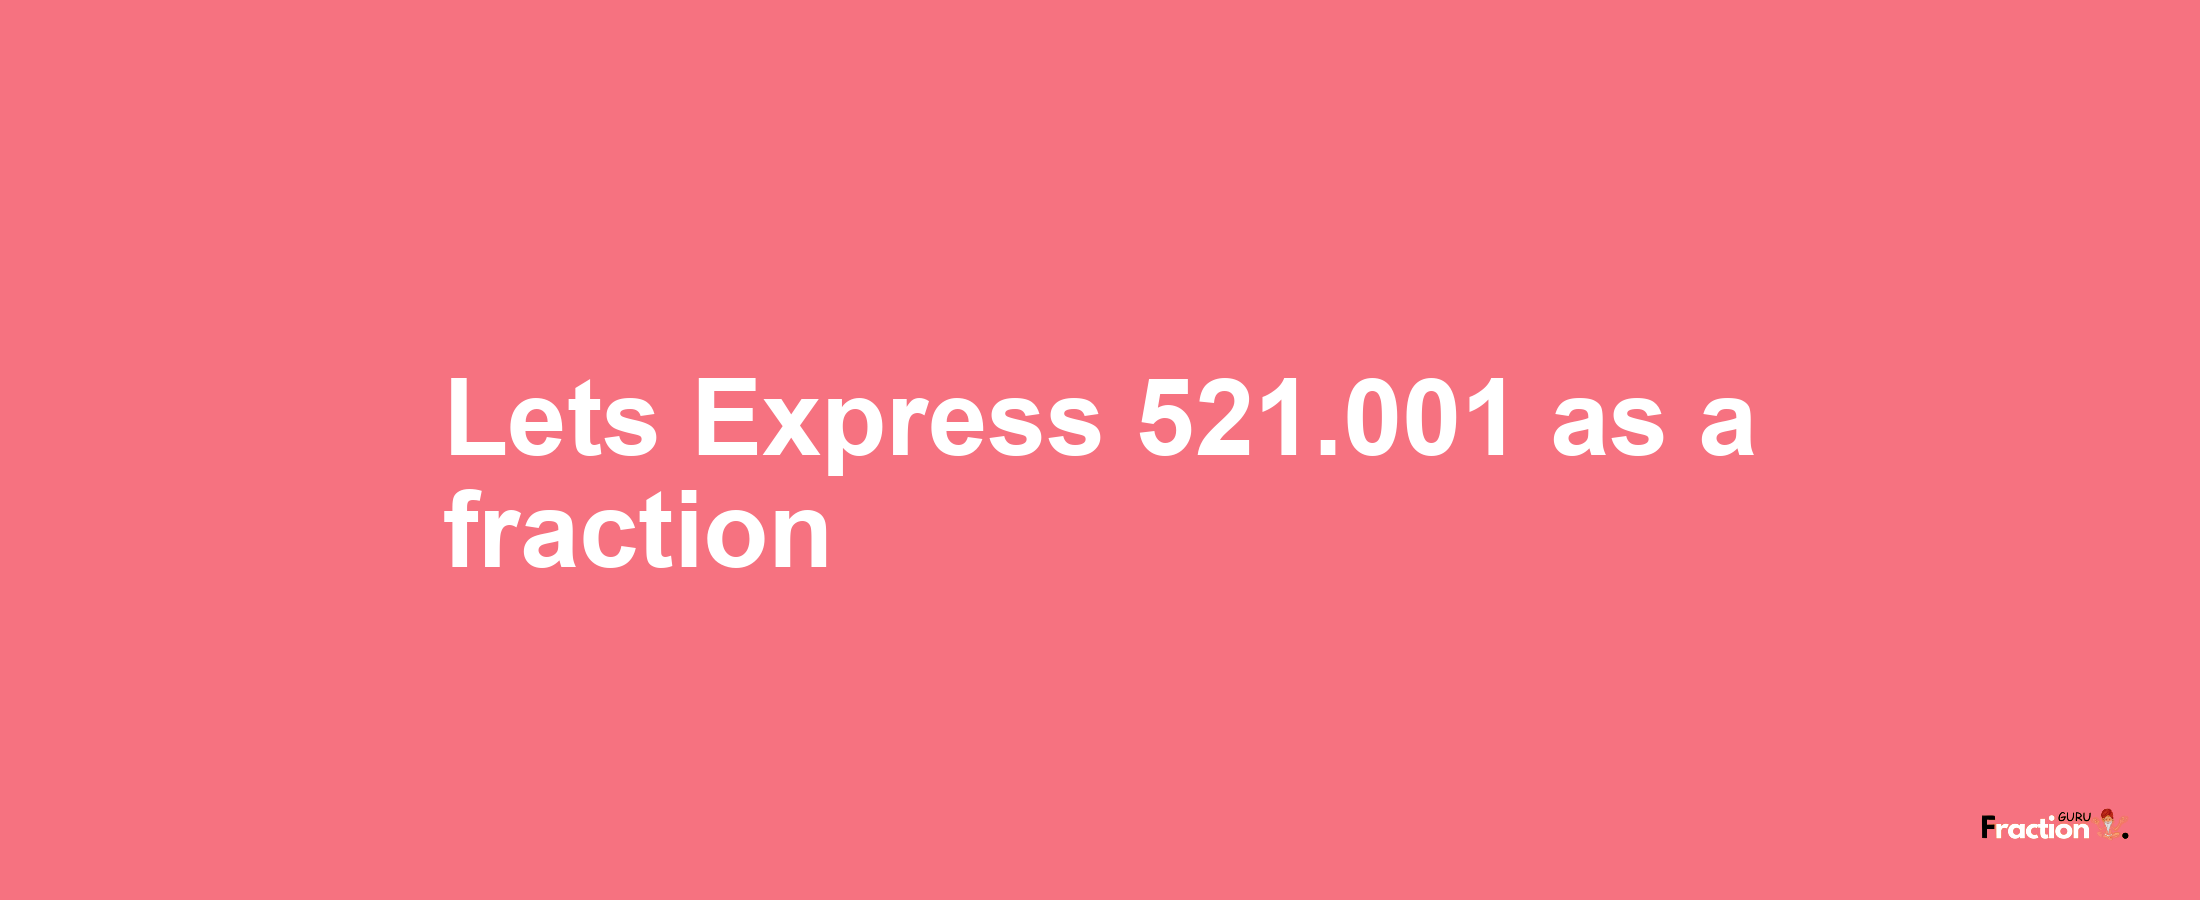 Lets Express 521.001 as afraction